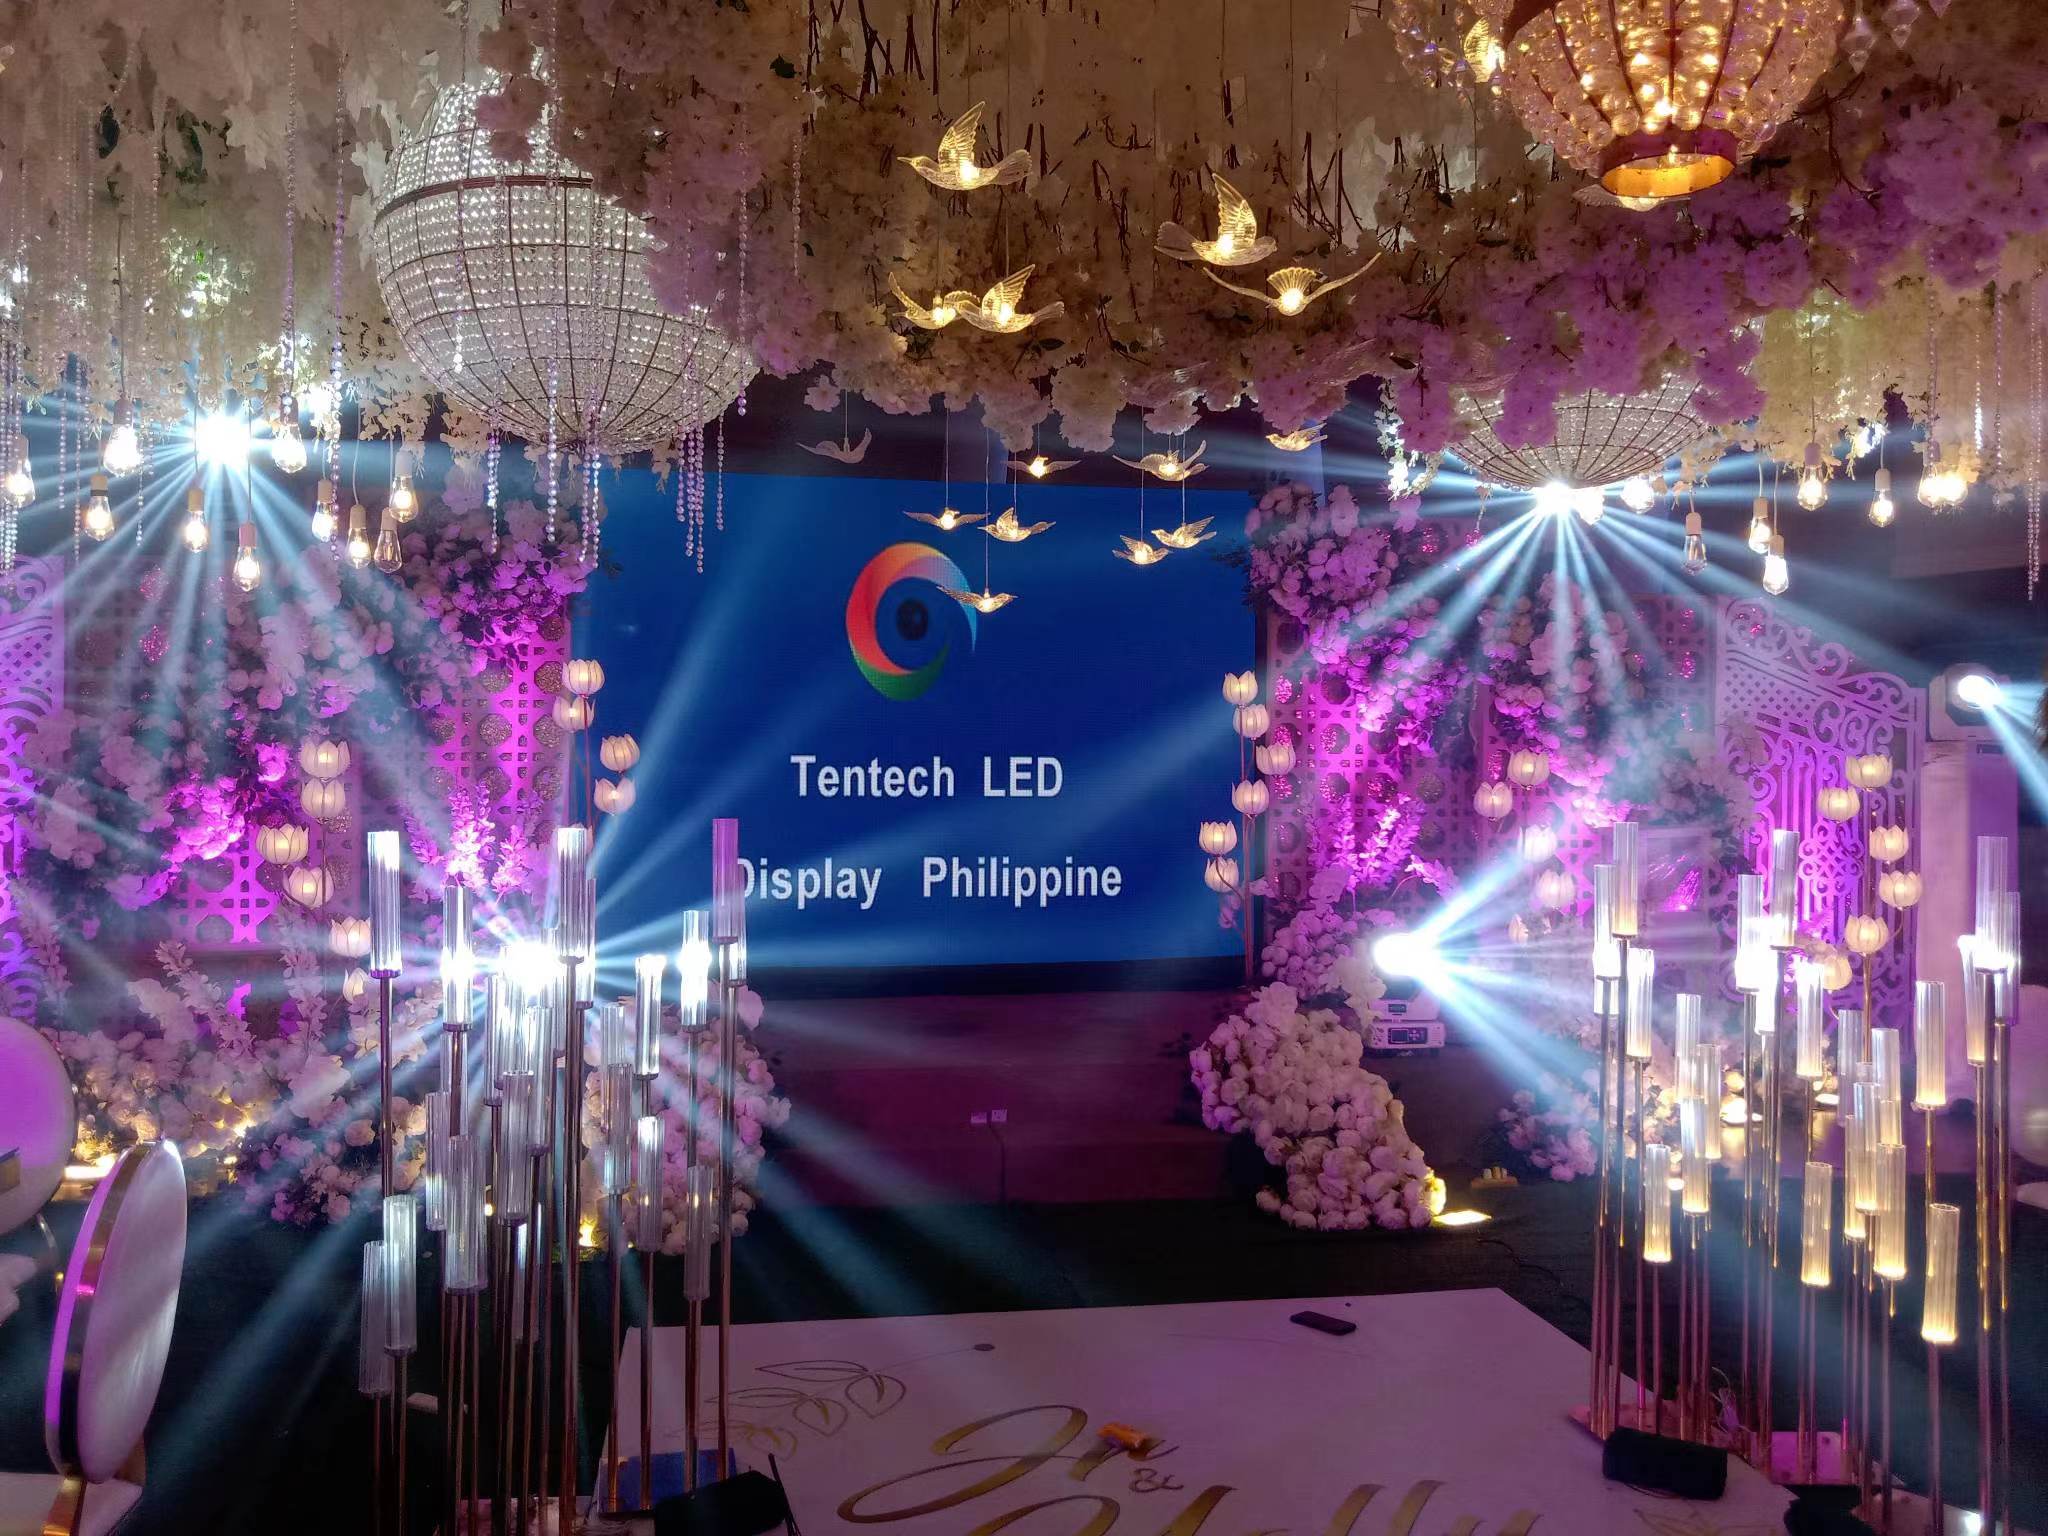 Rental LED Screens - Perfect Solution for Weddings, Conferences, Live Events, and Concerts